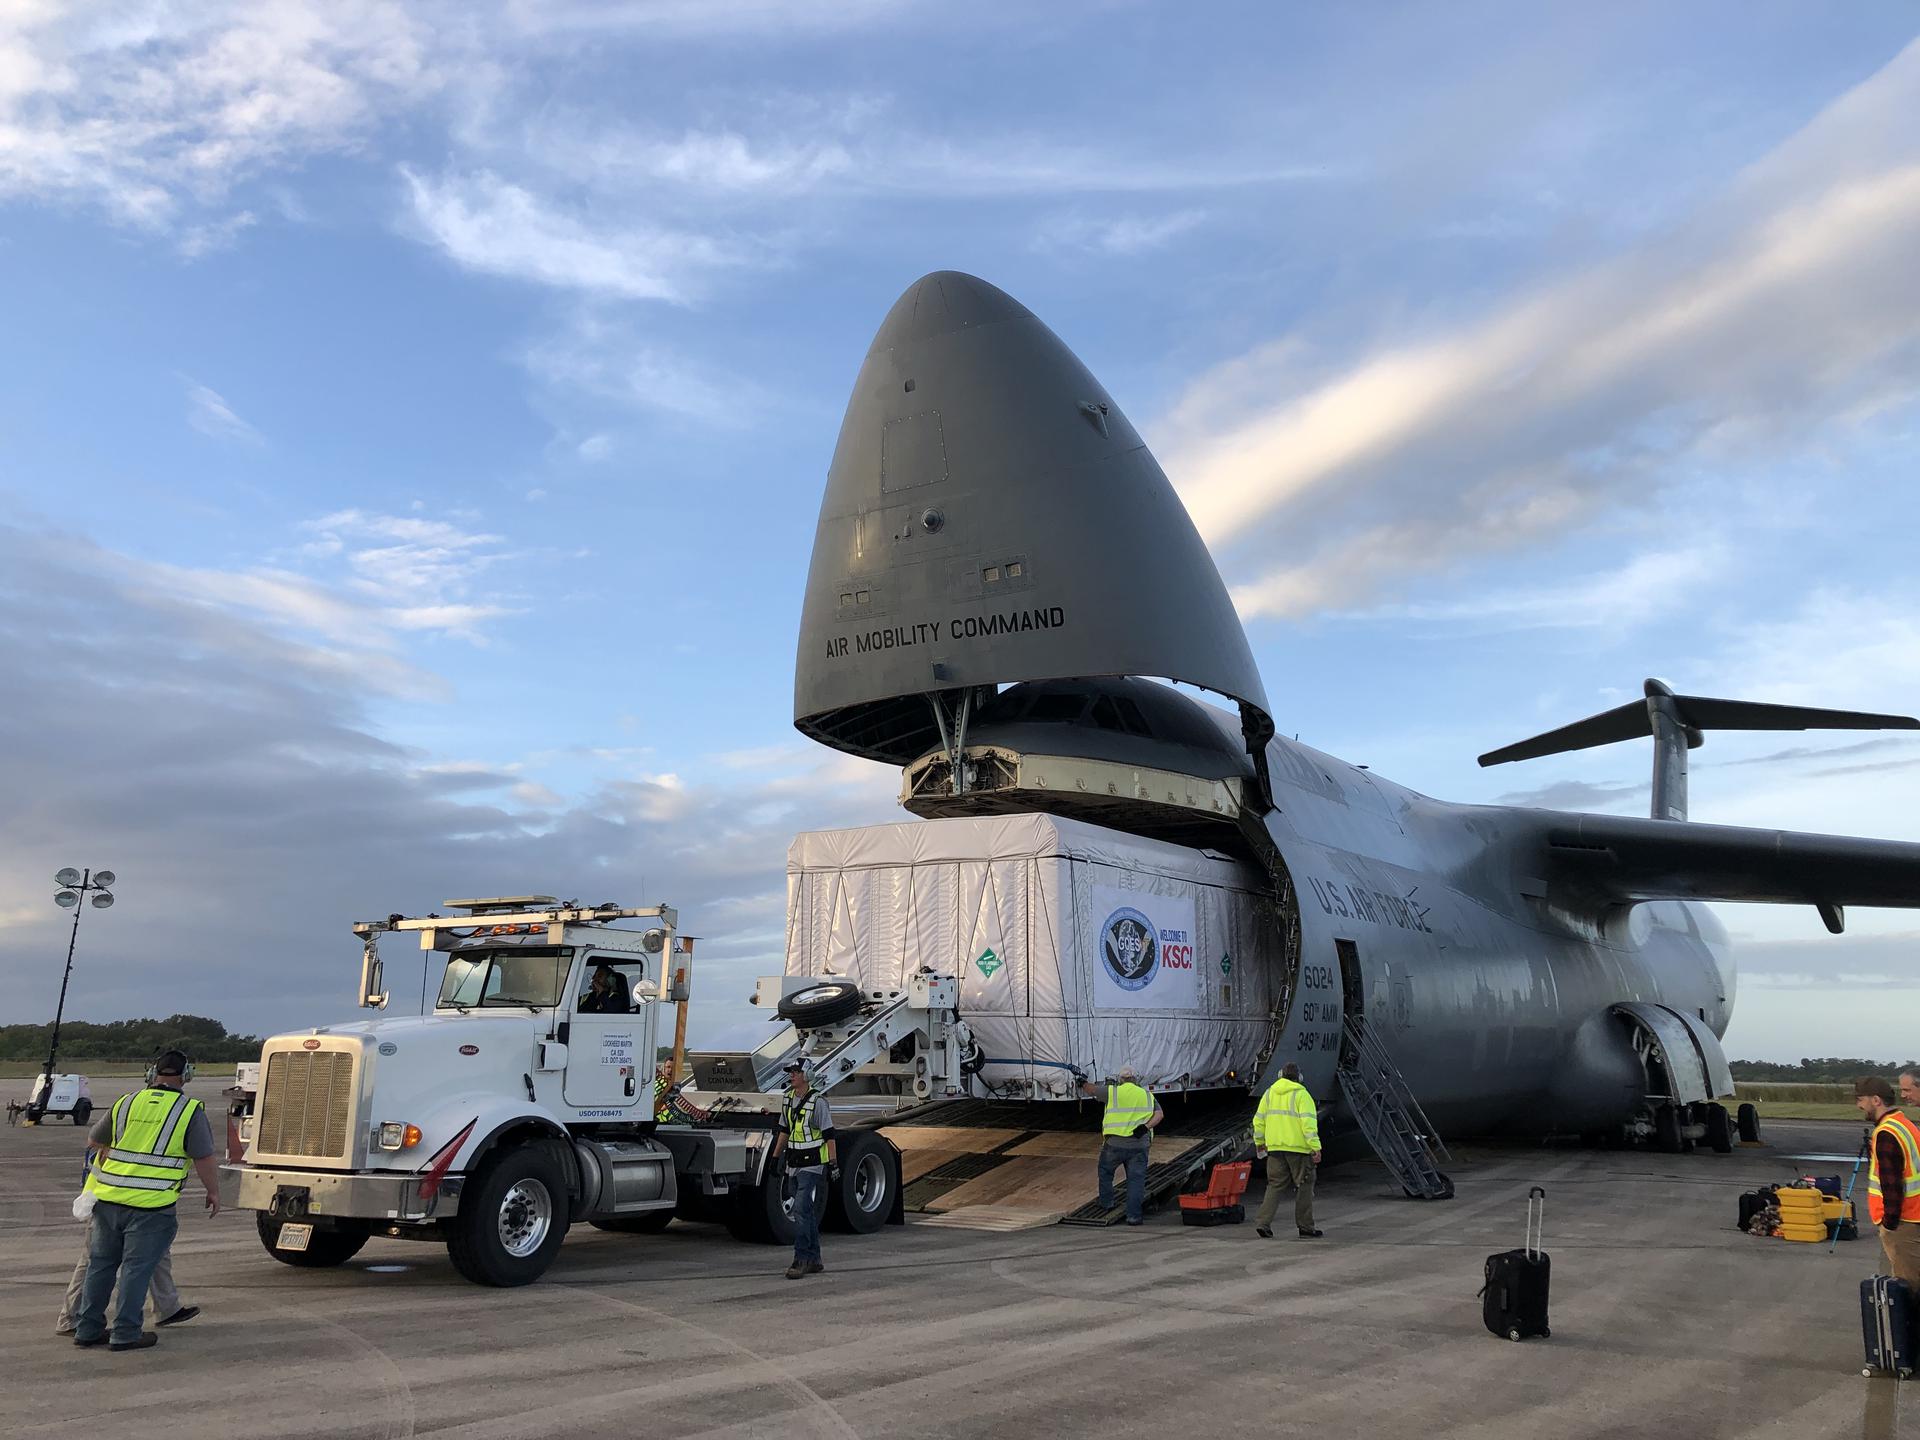 The shipping container holding the Geostationary Operational Environmental Satellite T (GOES-T) is unloaded from a cargo plane following its arrival at the Launch and Landing Facility runway at NASA’s Kennedy Space Center in Florida on Nov. 10, 2021.